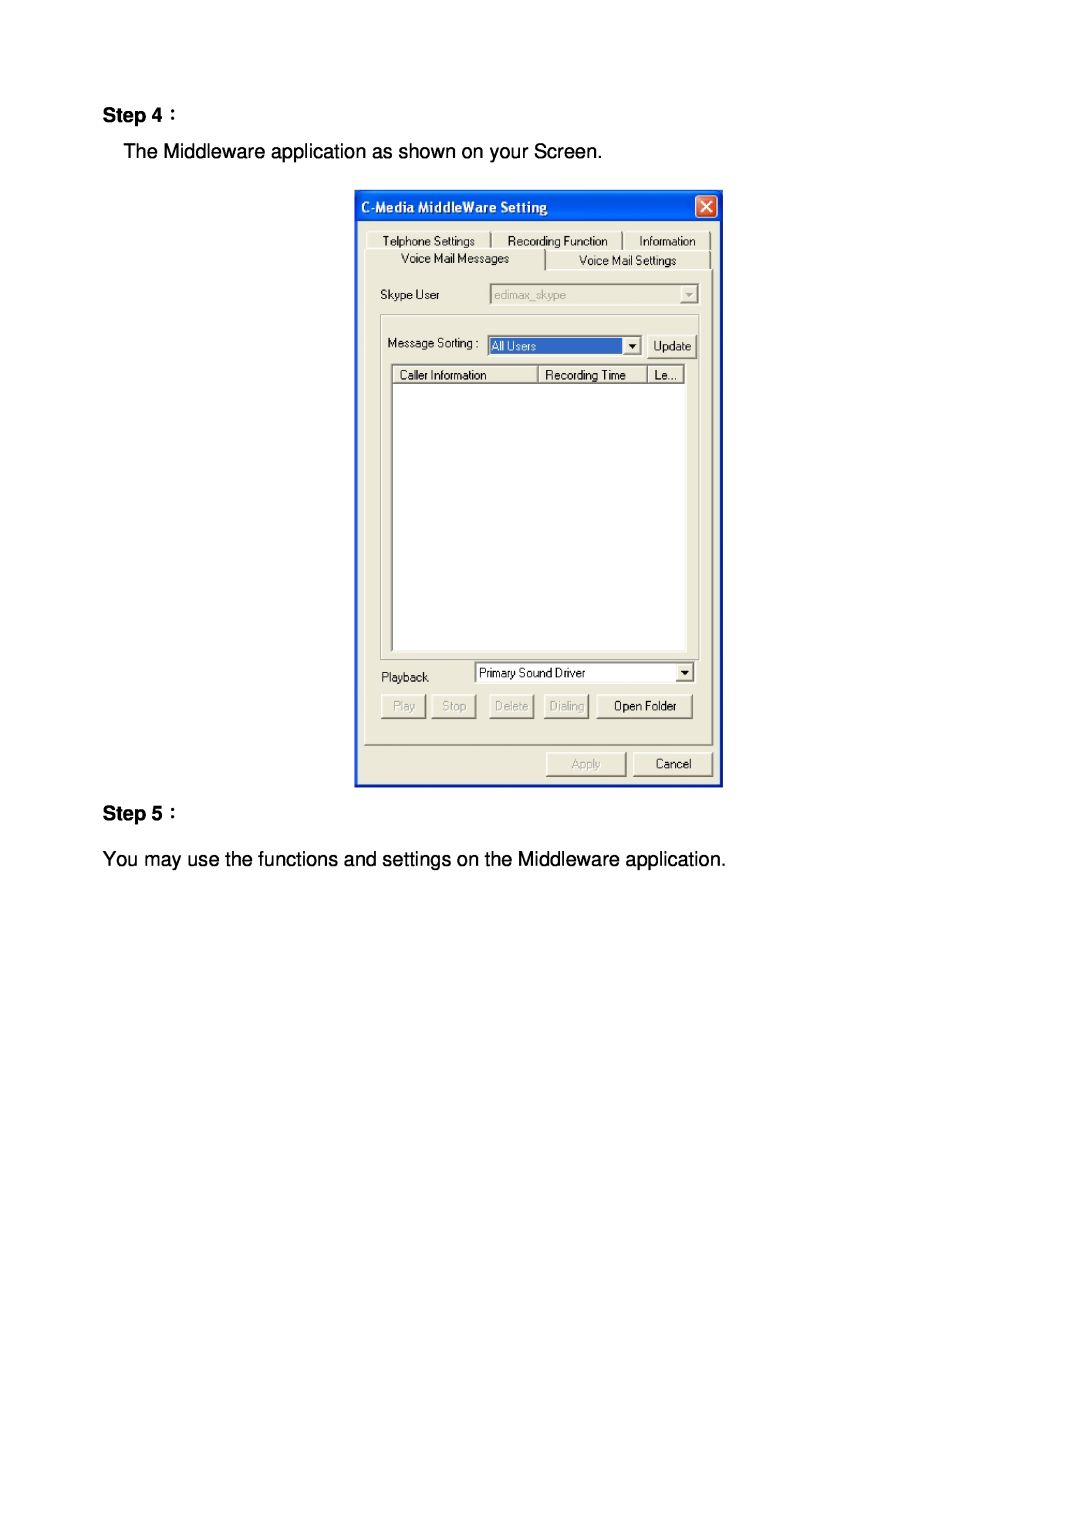 Edimax Technology VO-4500SK V2.0 user manual ：, The Middleware application as shown on your Screen 